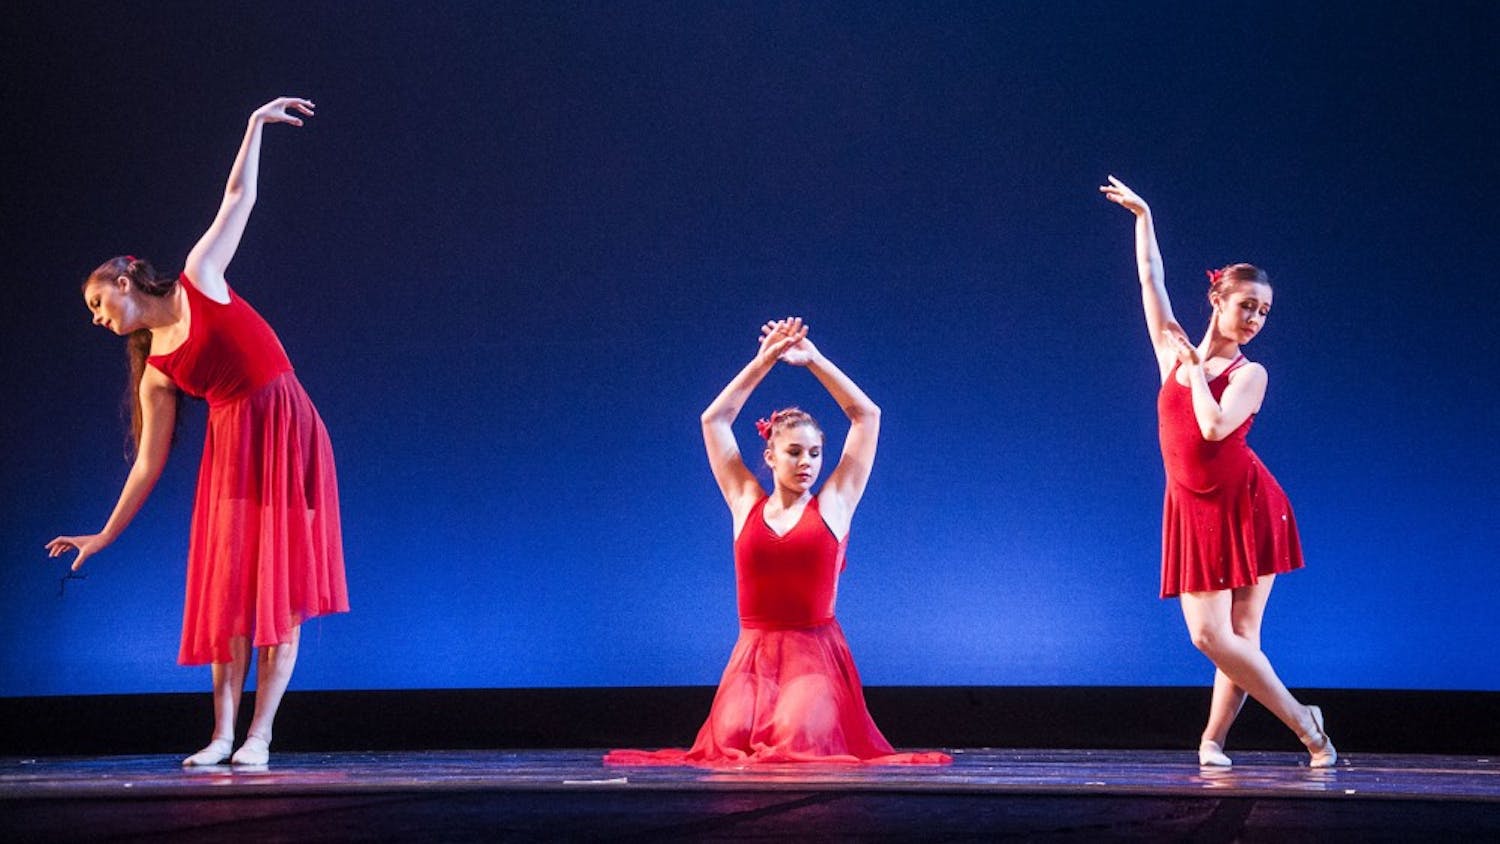 USC dance students are putting on a performance this week that considers the lives of those affected by cancer.